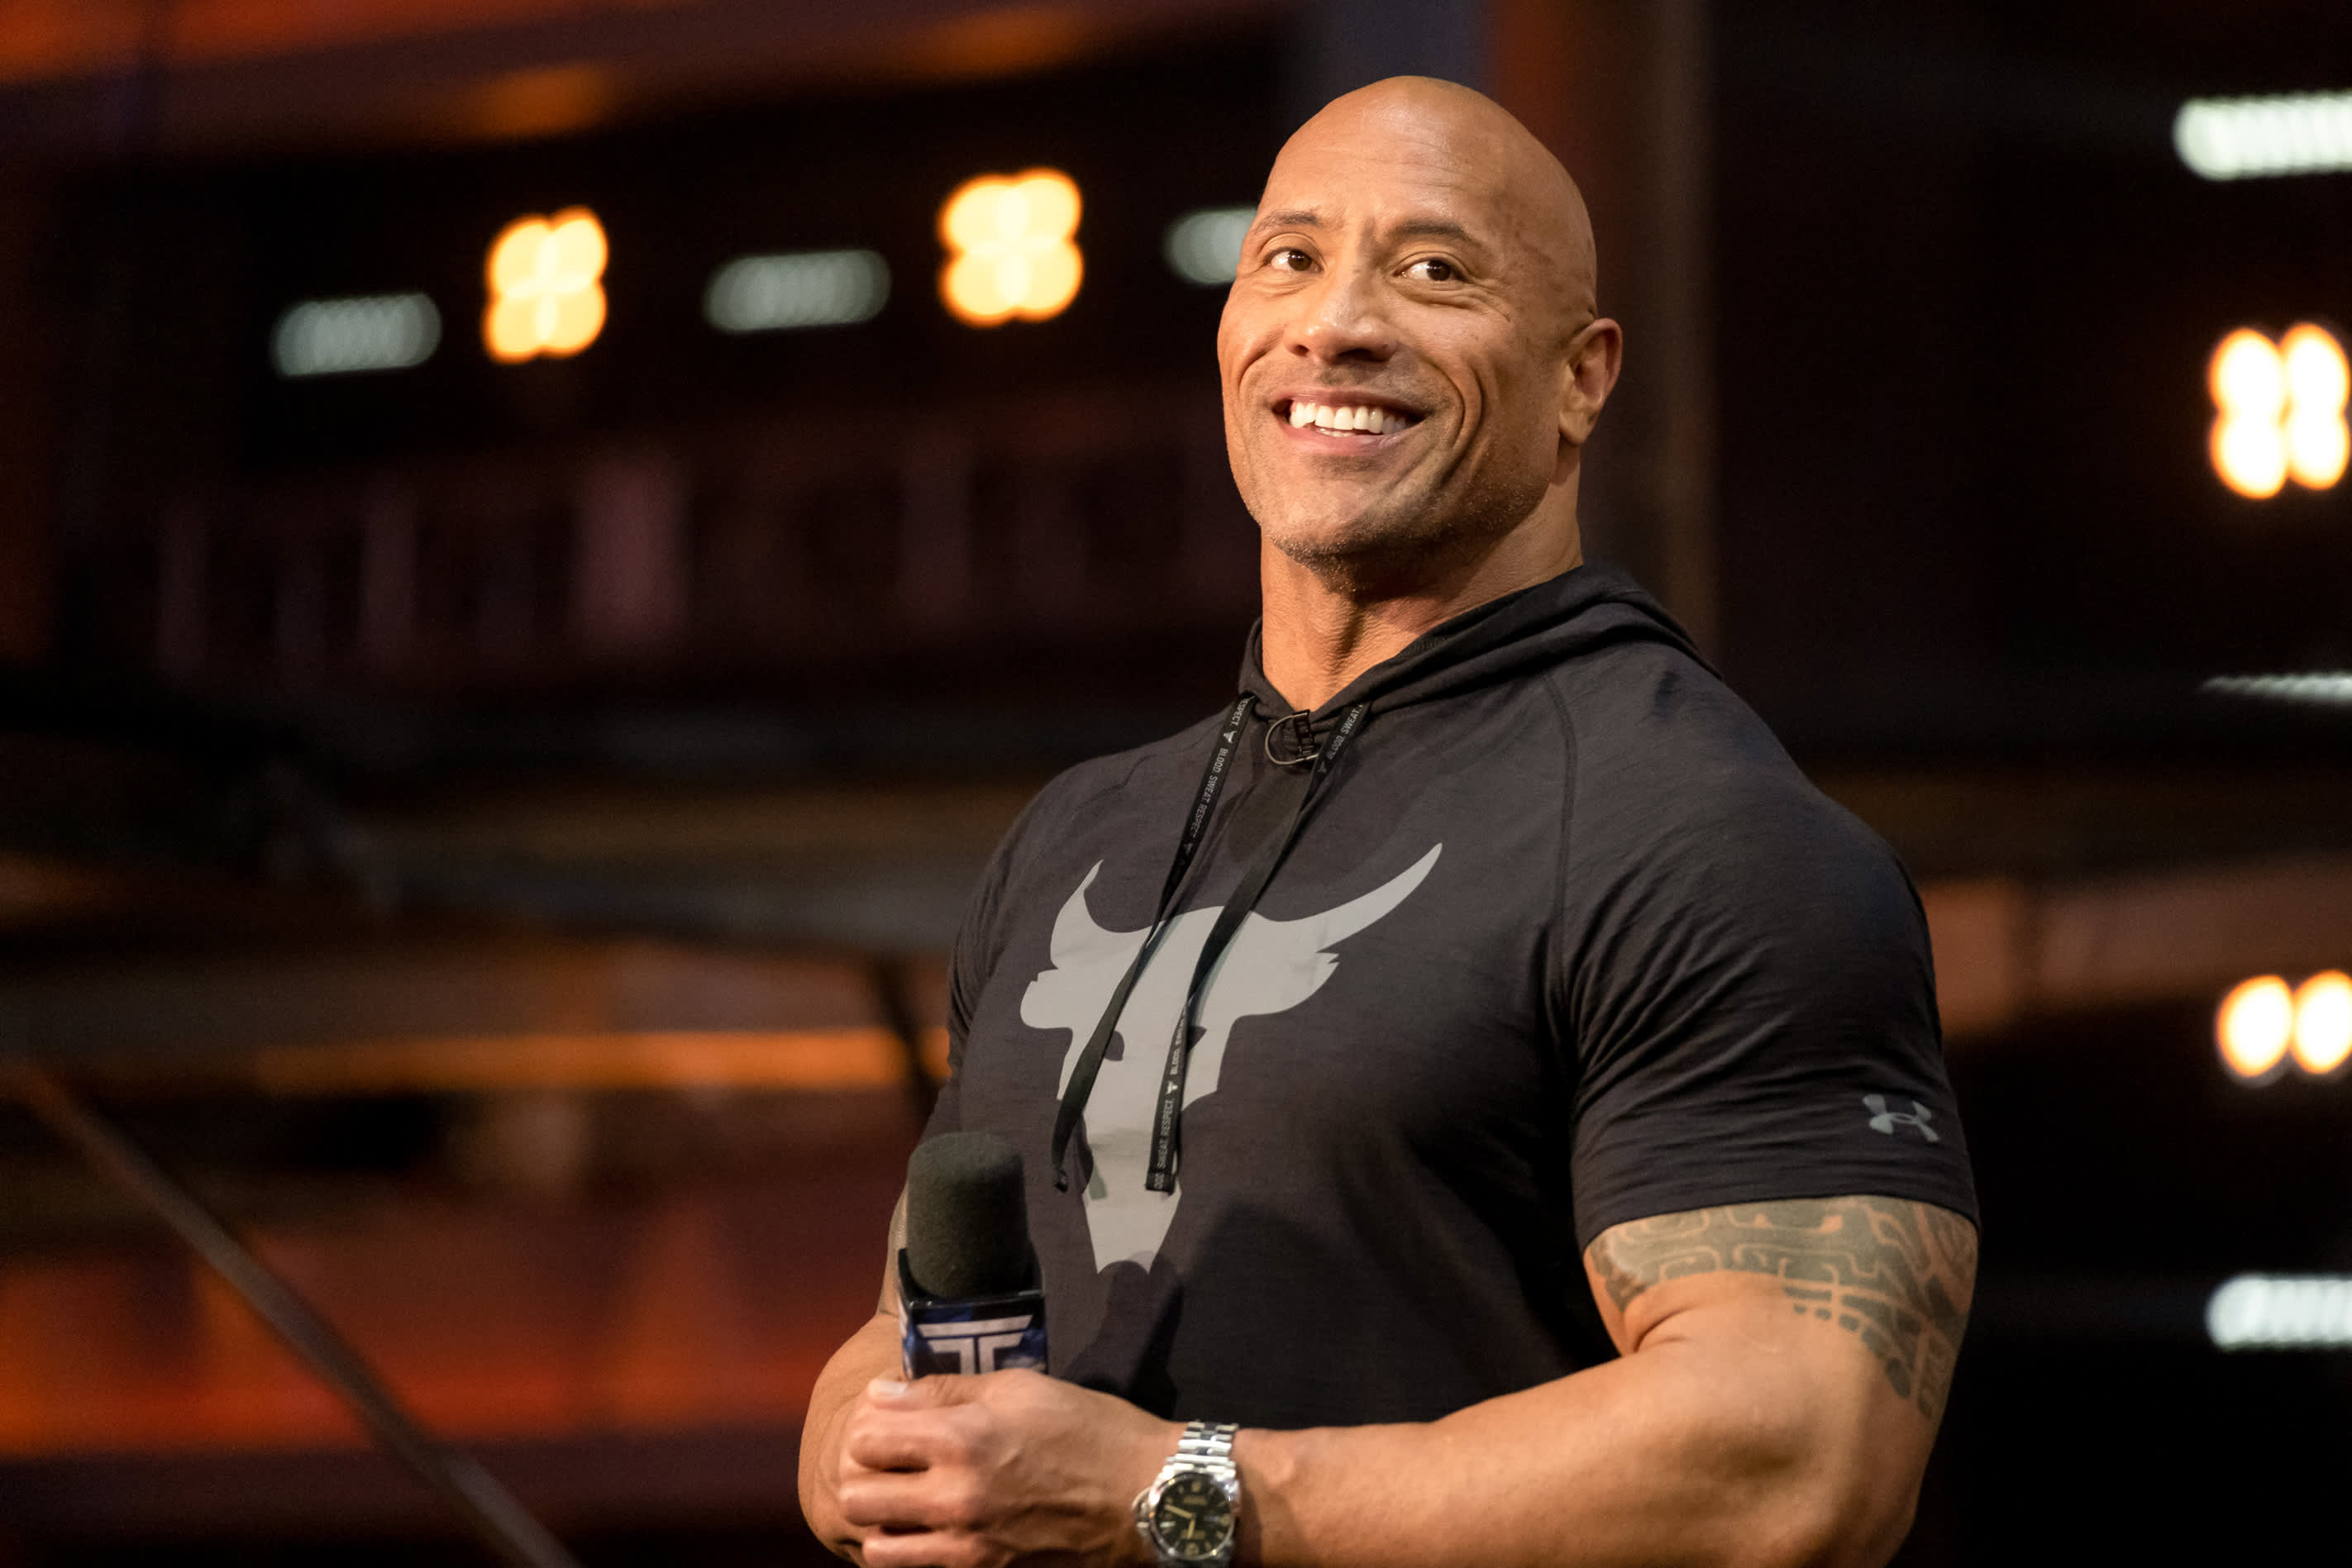 Dwayne The Rock Johnson On Where He Gets His Drive